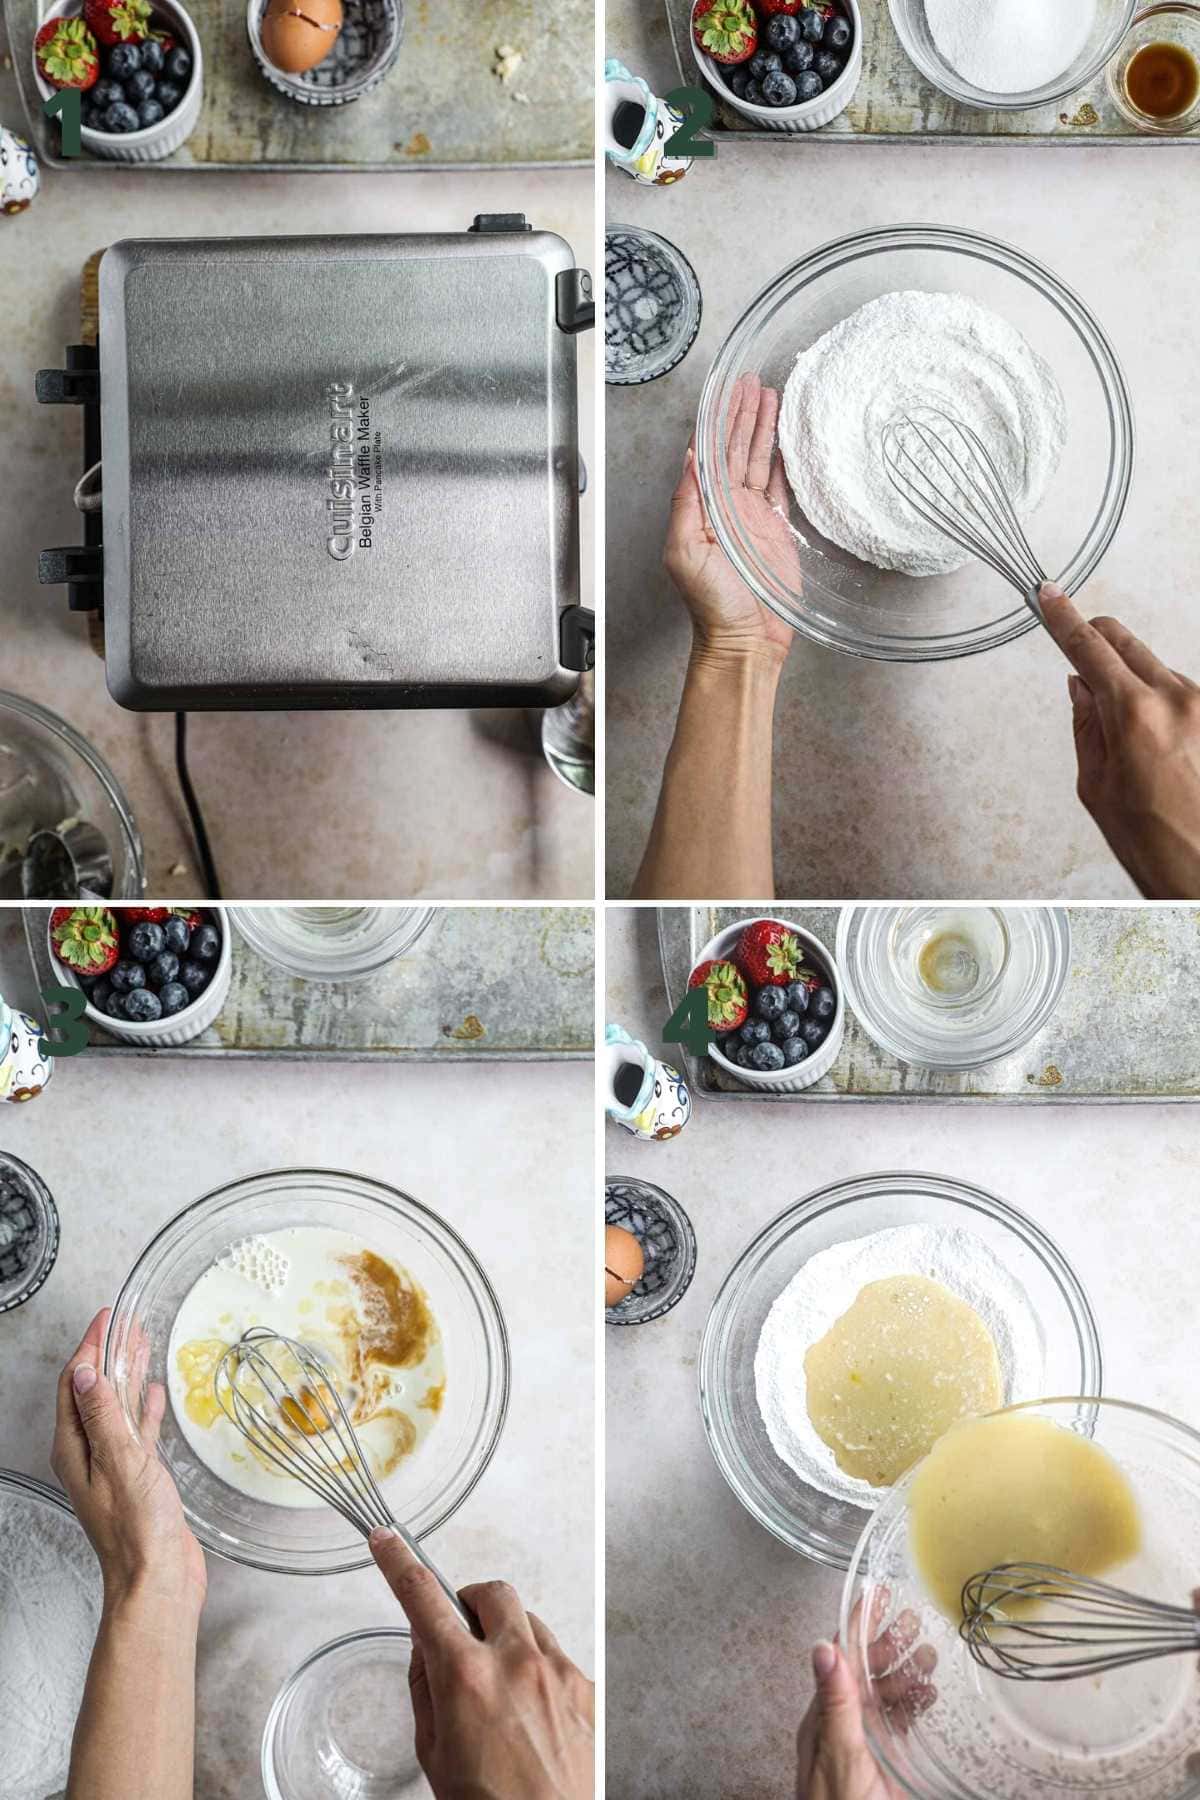 Steps to make mochi waffles, including preheating the waffle iron, mixing the dry ingredients, mixing the wet ingredients, and combining the two.